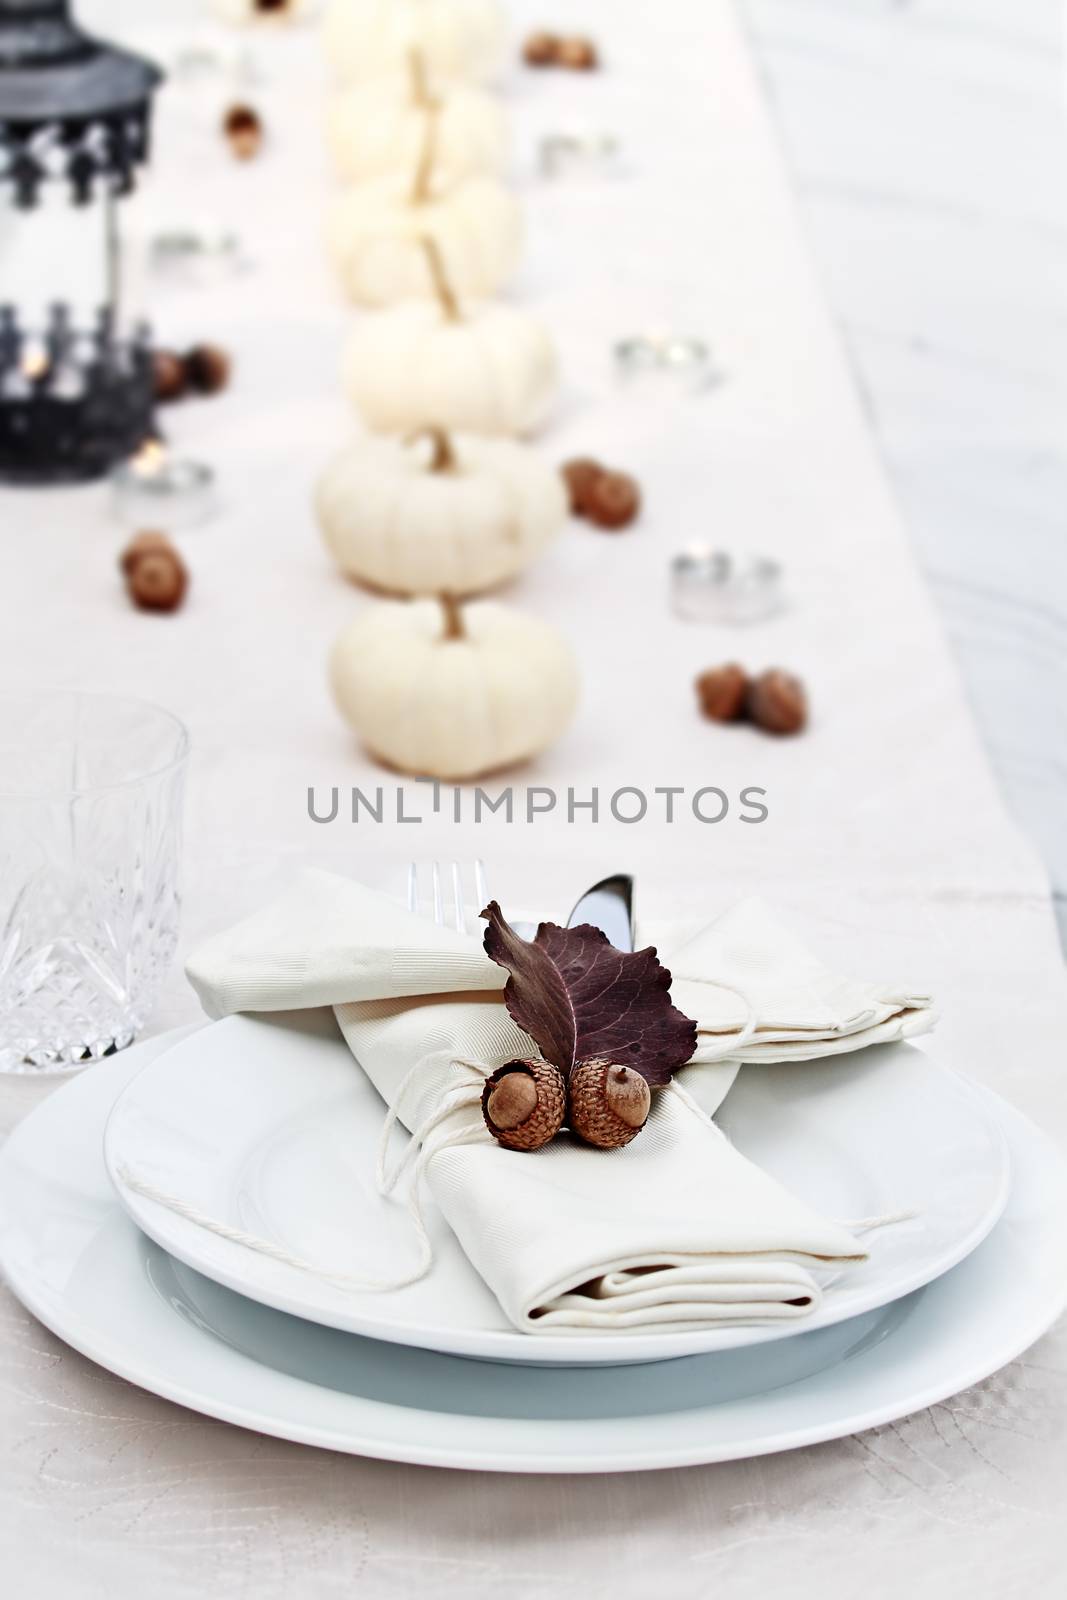 Beautiful table set with white pumpkins and natural items ready for an autumn meal.